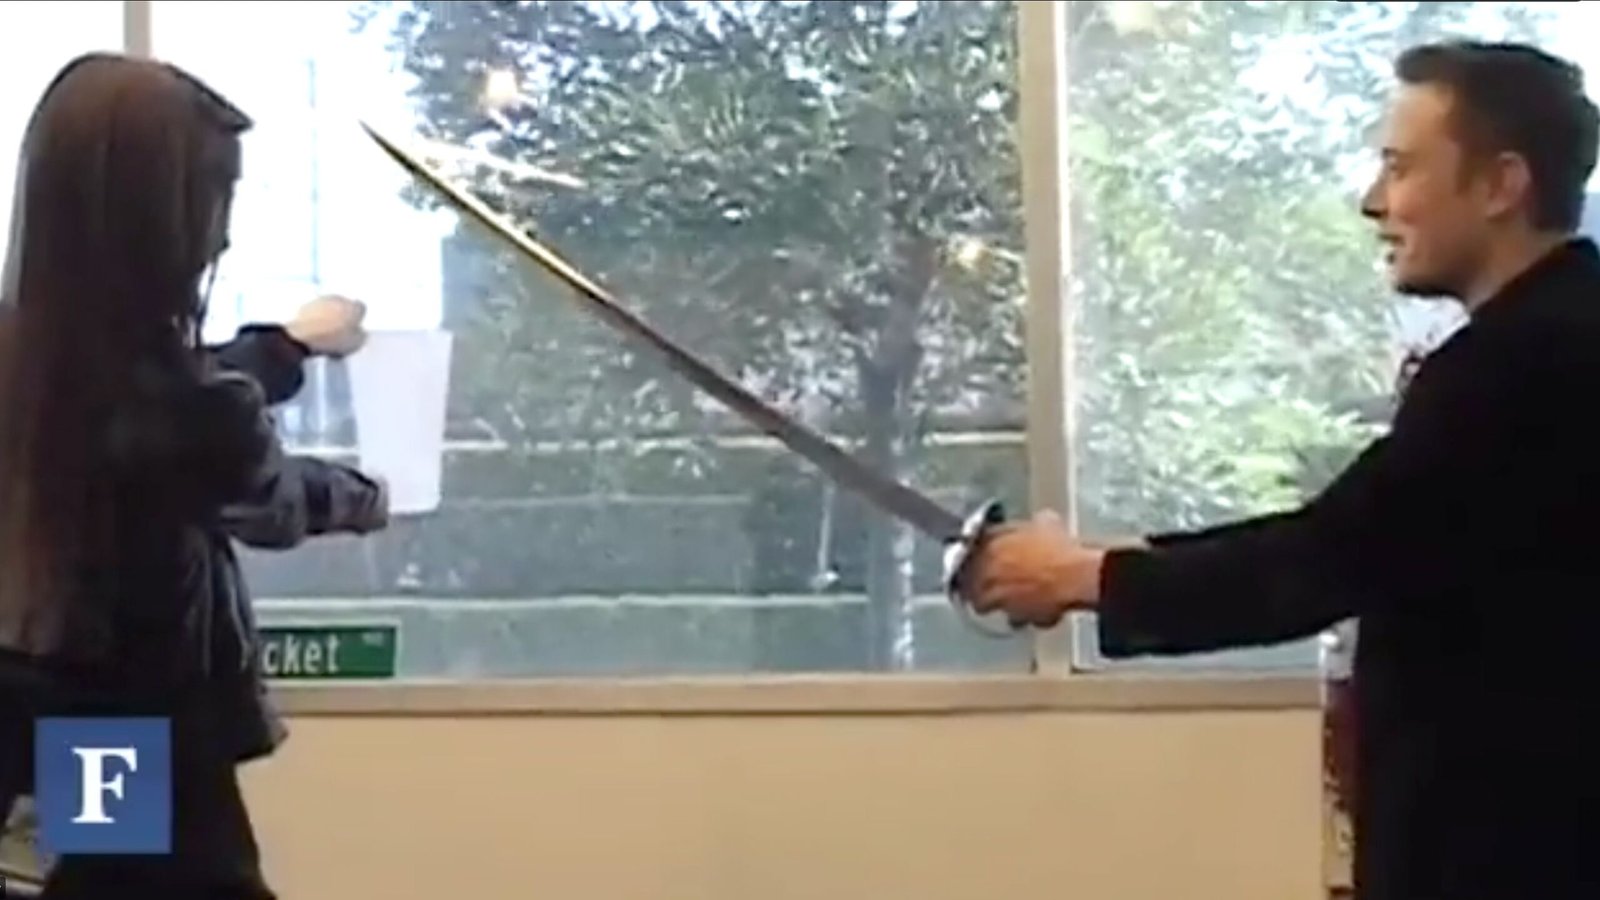 Old Video Of Elon Musk Showing Of His Sword Skills Goes Viral